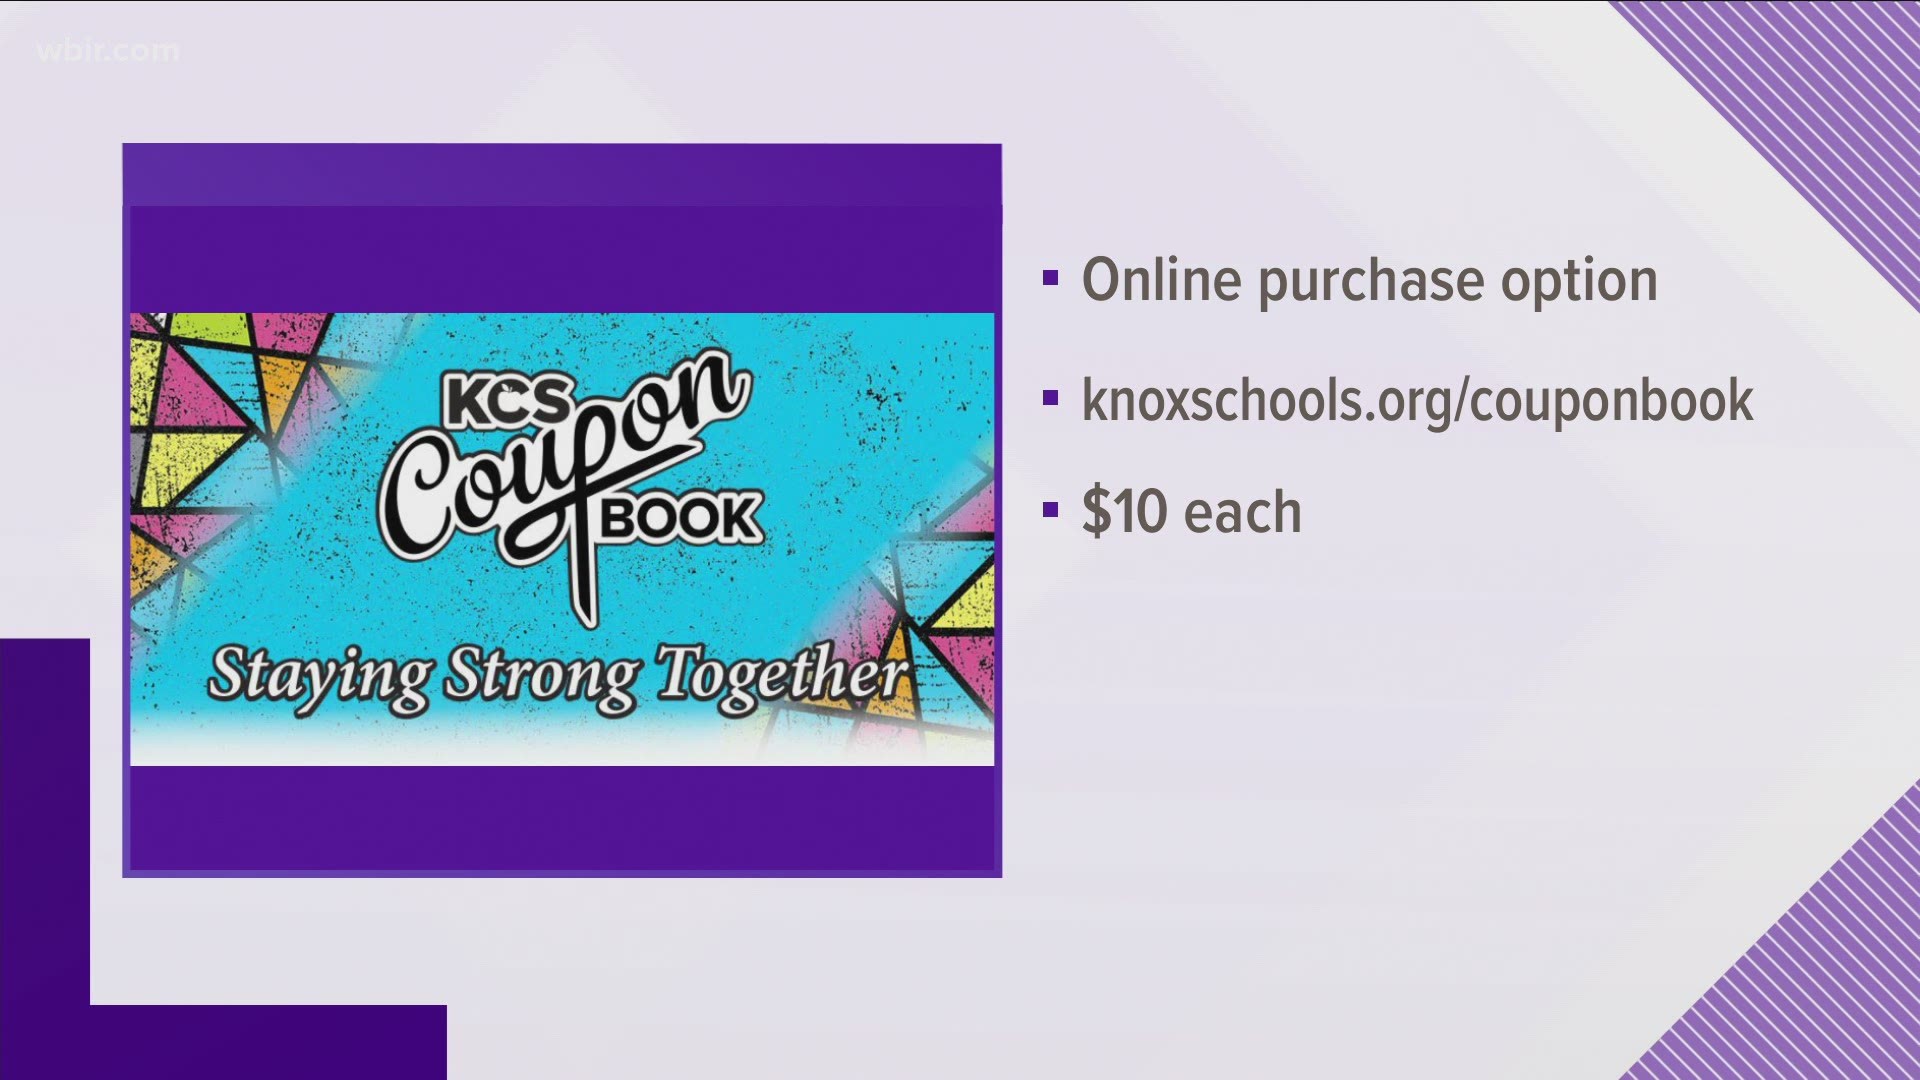 "Staying Strong Together" Knox County Schools kicks off coupon book